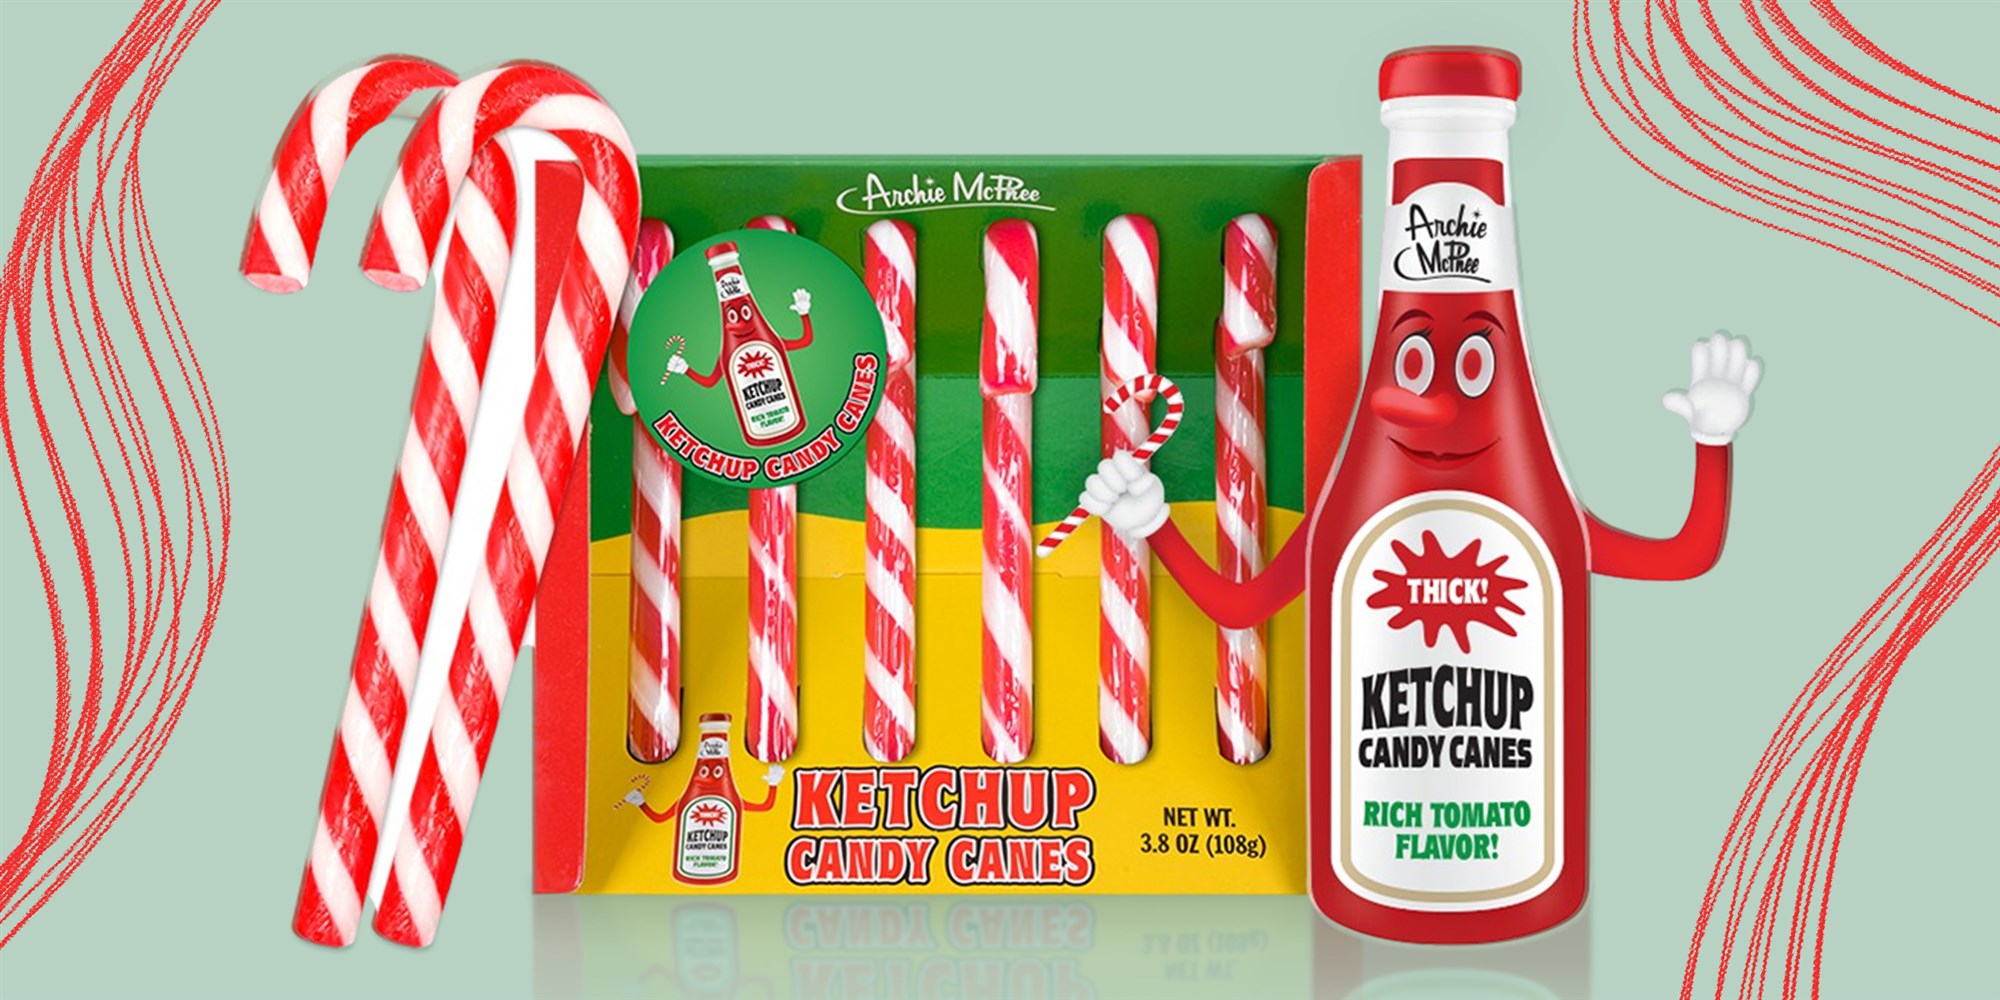 Ketchup Candy Canes Are the Christmas Treats No One Asked For